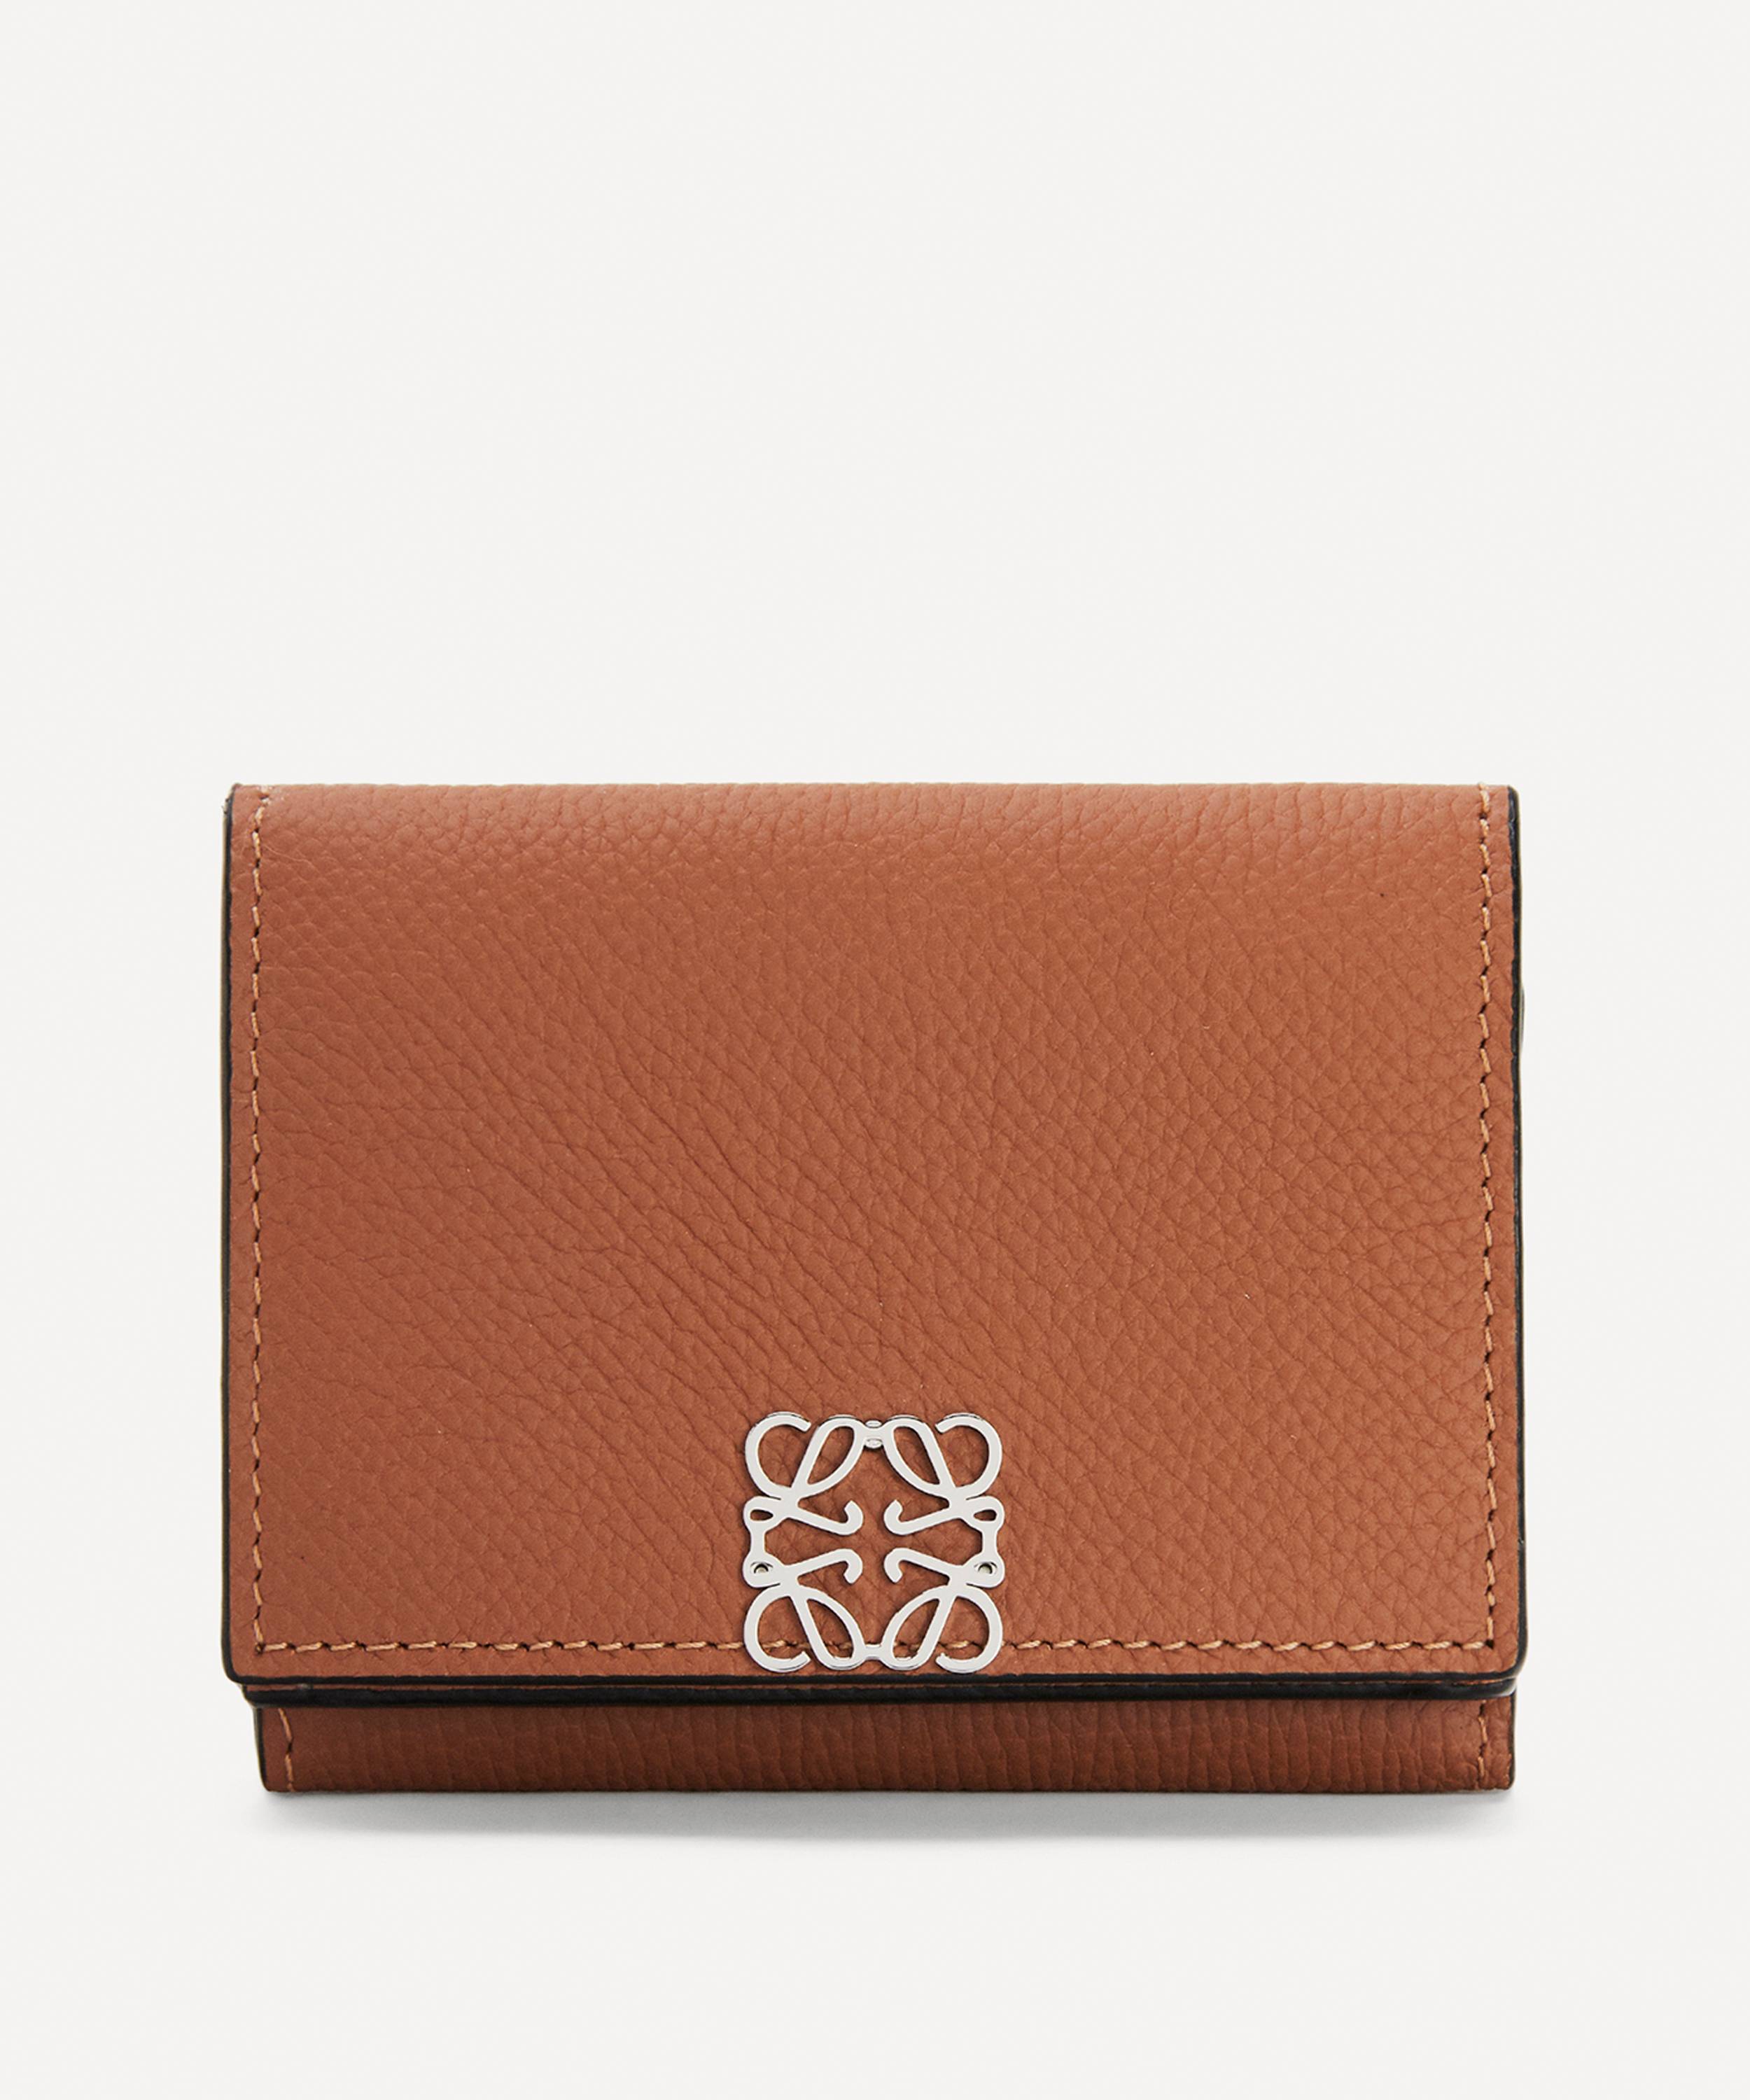 Loewe Anagram Leather Six Card Trifold Wallet | Liberty